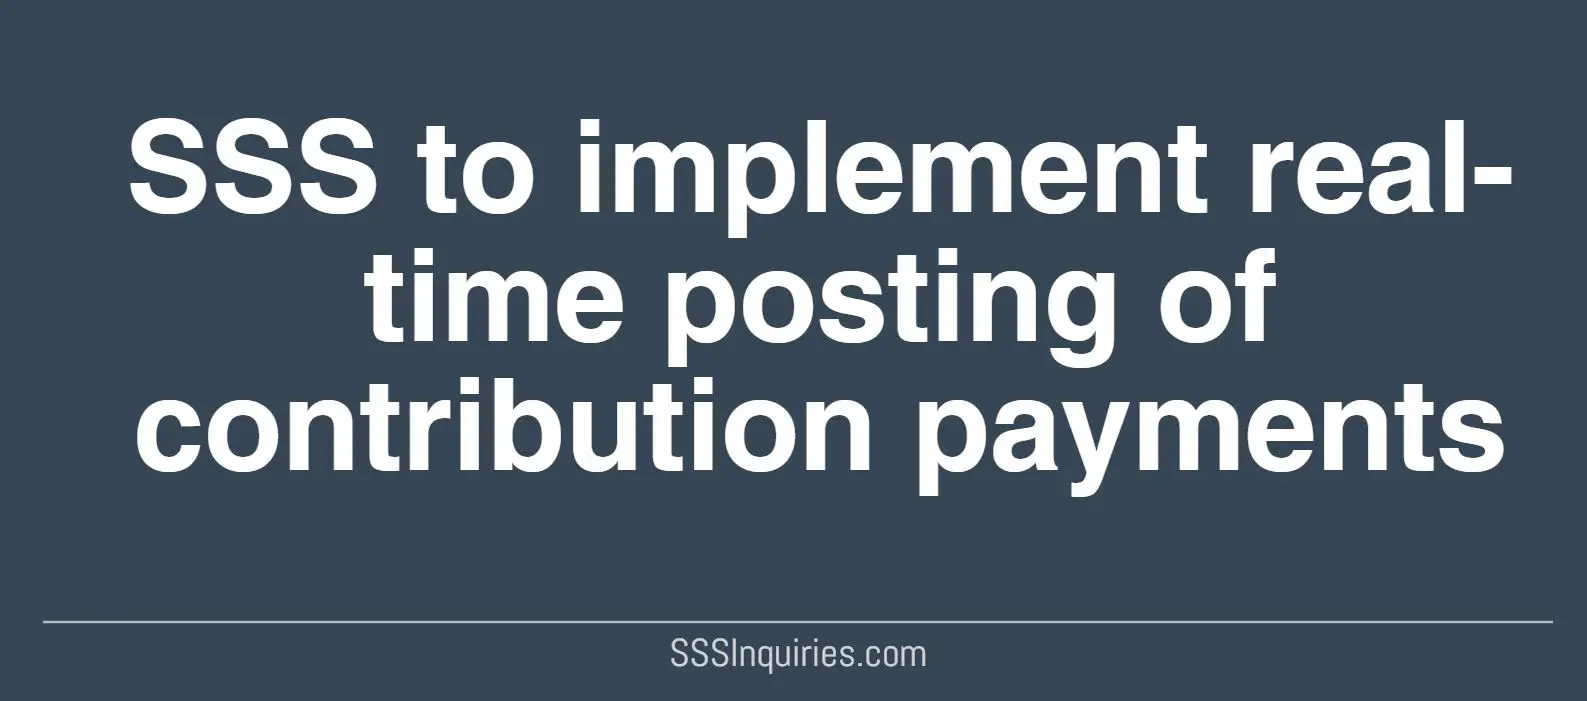 SSS to Implement real time posting